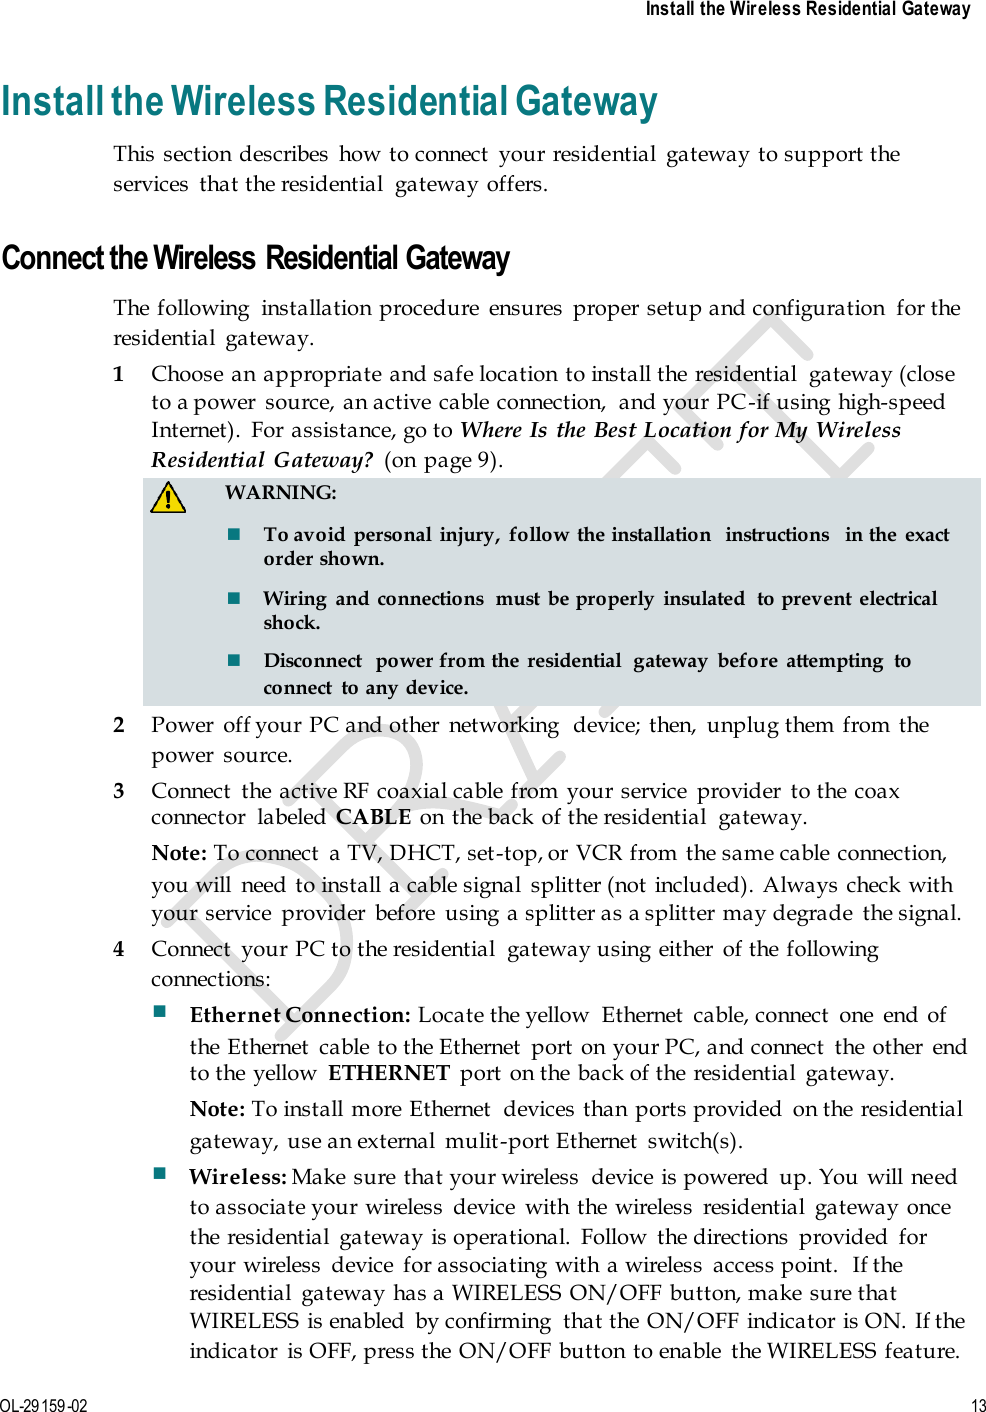     Install the Wireless Residential Gateway  OL-29159-02 13  Install the Wireless Residential Gateway This  section describes  how to connect  your residential  gateway to support the services  that the residential  gateway offers.    Connect the Wireless Residential Gateway The  following  installation procedure  ensures  proper setup and configuration  for the residential  gateway. 1 Choose an  appropriate and safe location  to install the residential  gateway (close to a power  source, an active cable connection,  and your PC-if using high-speed Internet).  For  assistance, go to Where Is the Best Location for My Wireless Residential  Gateway?  (on  page 9).   WARNING:  To avoid  personal  injury,  follow  the installation  instructions  in the  exact order shown.  Wiring  and  connections  must  be properly  insulated  to prevent  electrical shock.  Disconnect  power from the residential  gateway  before  attempting  to connect  to any device. 2 Power  off your PC and other  networking  device; then,  unplug them from the power  source. 3 Connect  the active RF coaxial cable from your service  provider  to the coax connector  labeled  CABLE on the back of the residential  gateway. Note: To connect  a TV, DHCT, set-top, or  VCR from the same cable connection, you will  need to install a cable signal  splitter (not  included). Always check with your service  provider  before  using a splitter as a splitter may degrade  the signal.  4 Connect  your PC to the residential  gateway using either  of the following connections:  Ethernet Connection: Locate the yellow  Ethernet  cable, connect  one  end of the Ethernet  cable to the Ethernet  port on  your PC, and connect  the other  end to the  yellow  ETHERNET  port  on the back of the  residential  gateway. Note: To install more Ethernet  devices than ports provided  on the  residential gateway, use an external  mulit-port Ethernet  switch(s).  Wireless: Make  sure that your wireless  device is powered  up. You  will need to associate your wireless  device  with the wireless  residential  gateway once the residential  gateway is operational.  Follow  the directions  provided  for your wireless  device  for associating with  a wireless  access point.  If the residential  gateway has a WIRELESS  ON/OFF button, make  sure that WIRELESS  is enabled  by confirming  that the ON/OFF indicator is ON.  If the indicator  is OFF, press the  ON/OFF button  to enable  the WIRELESS feature. 